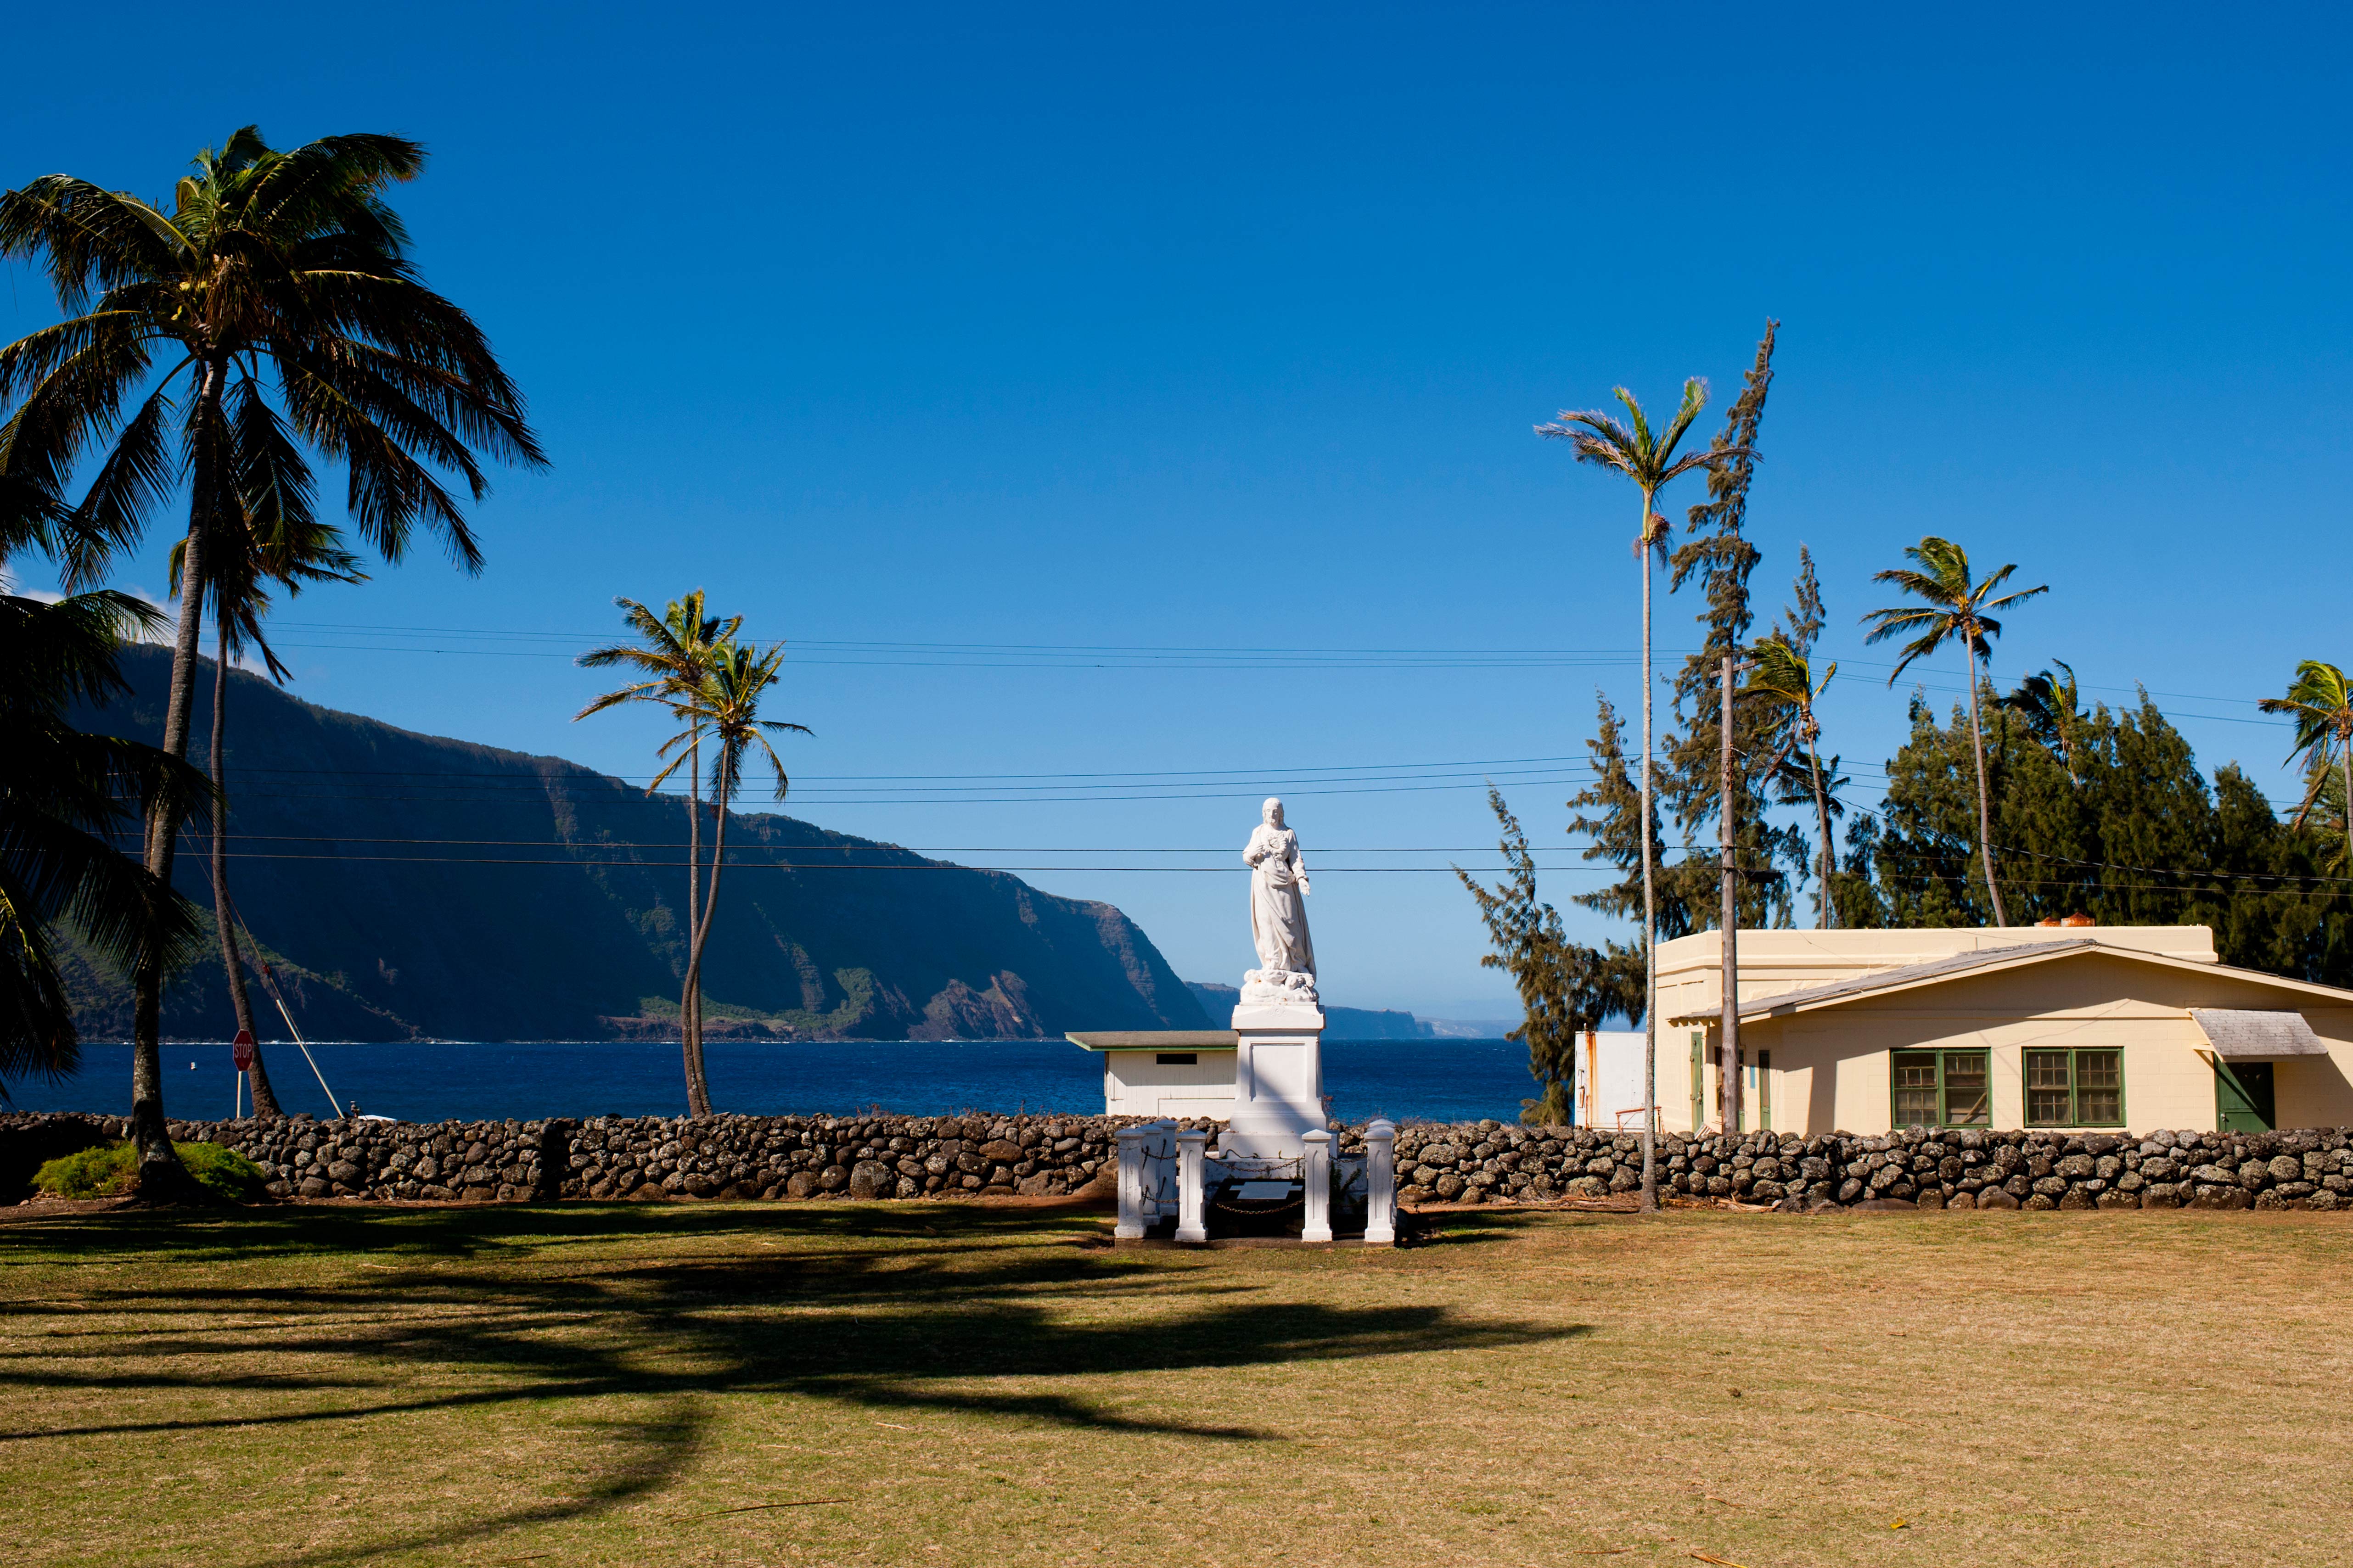 St. Francis Church in Kalaupapa. Image by Elyse Butler / Getty